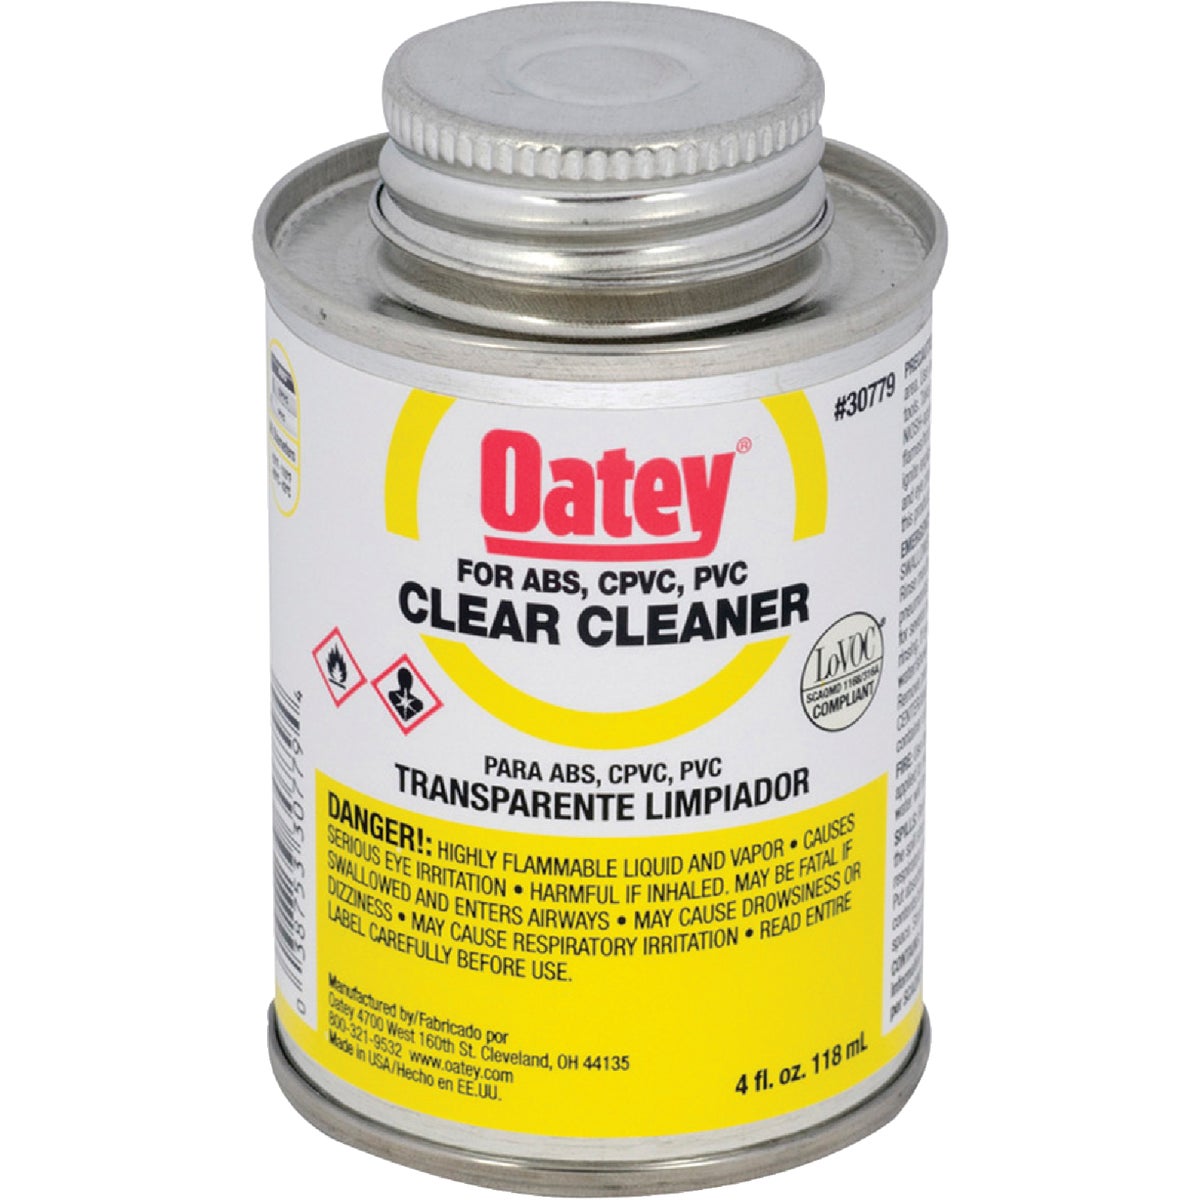 Oatey 4 Oz. All-Purpose Clear PVC Cleaner